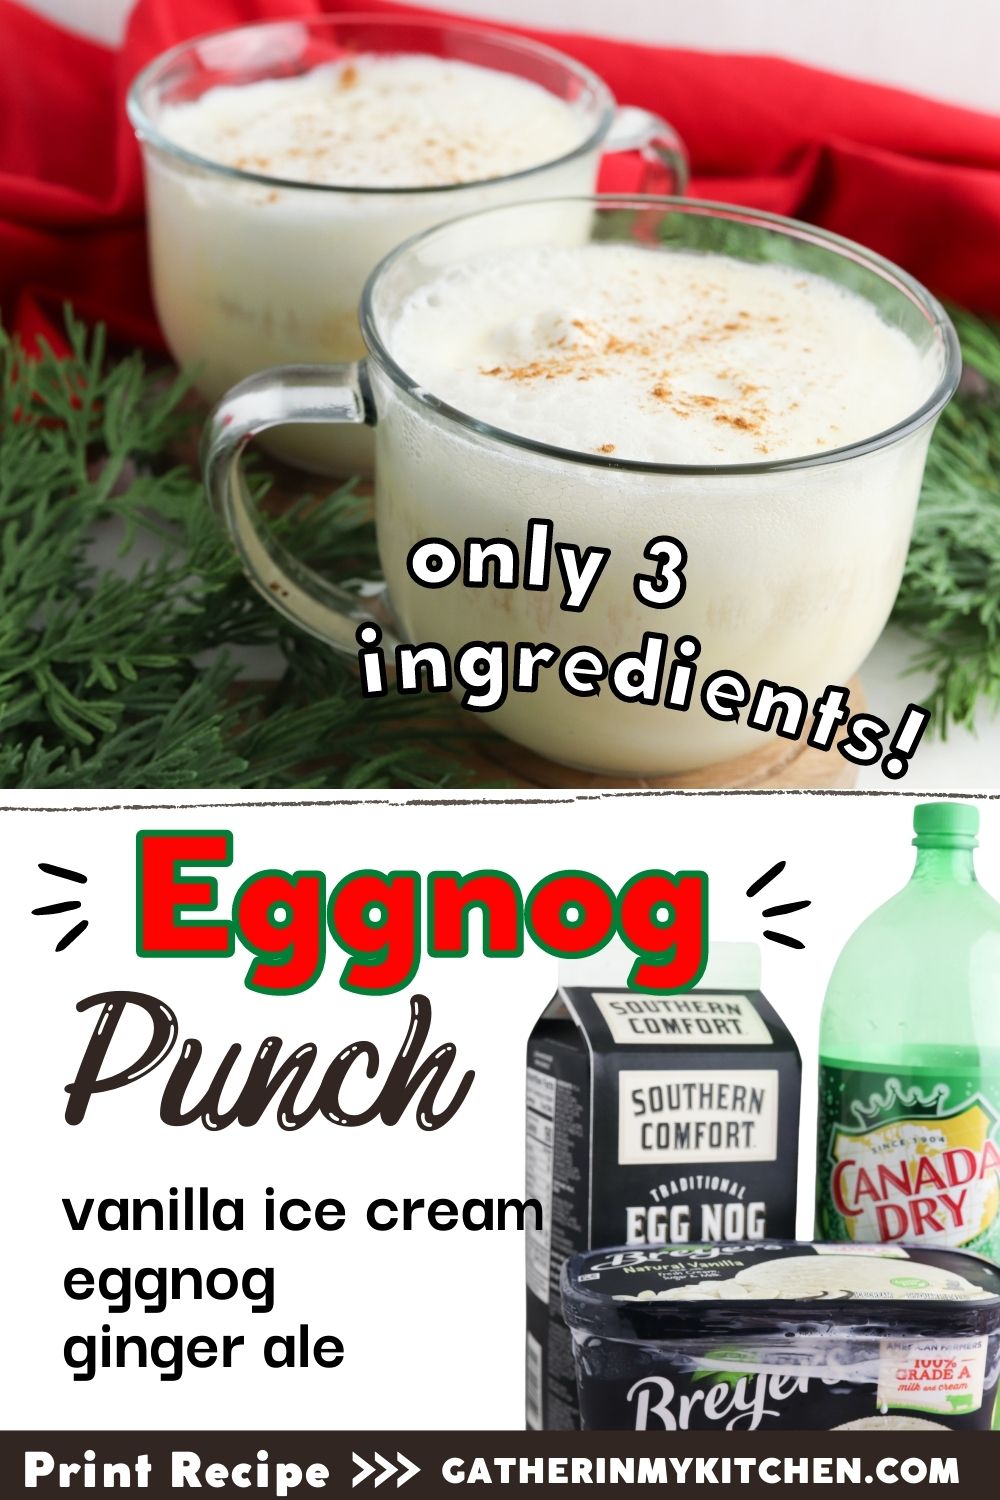 Top image of 2 cups of eggnog punch with "only 2 ingredients" overlaid. Bottom has "Eggnog Punch: vanilla ice cream, eggnog, ginger ale" and a pic of the ingredients.